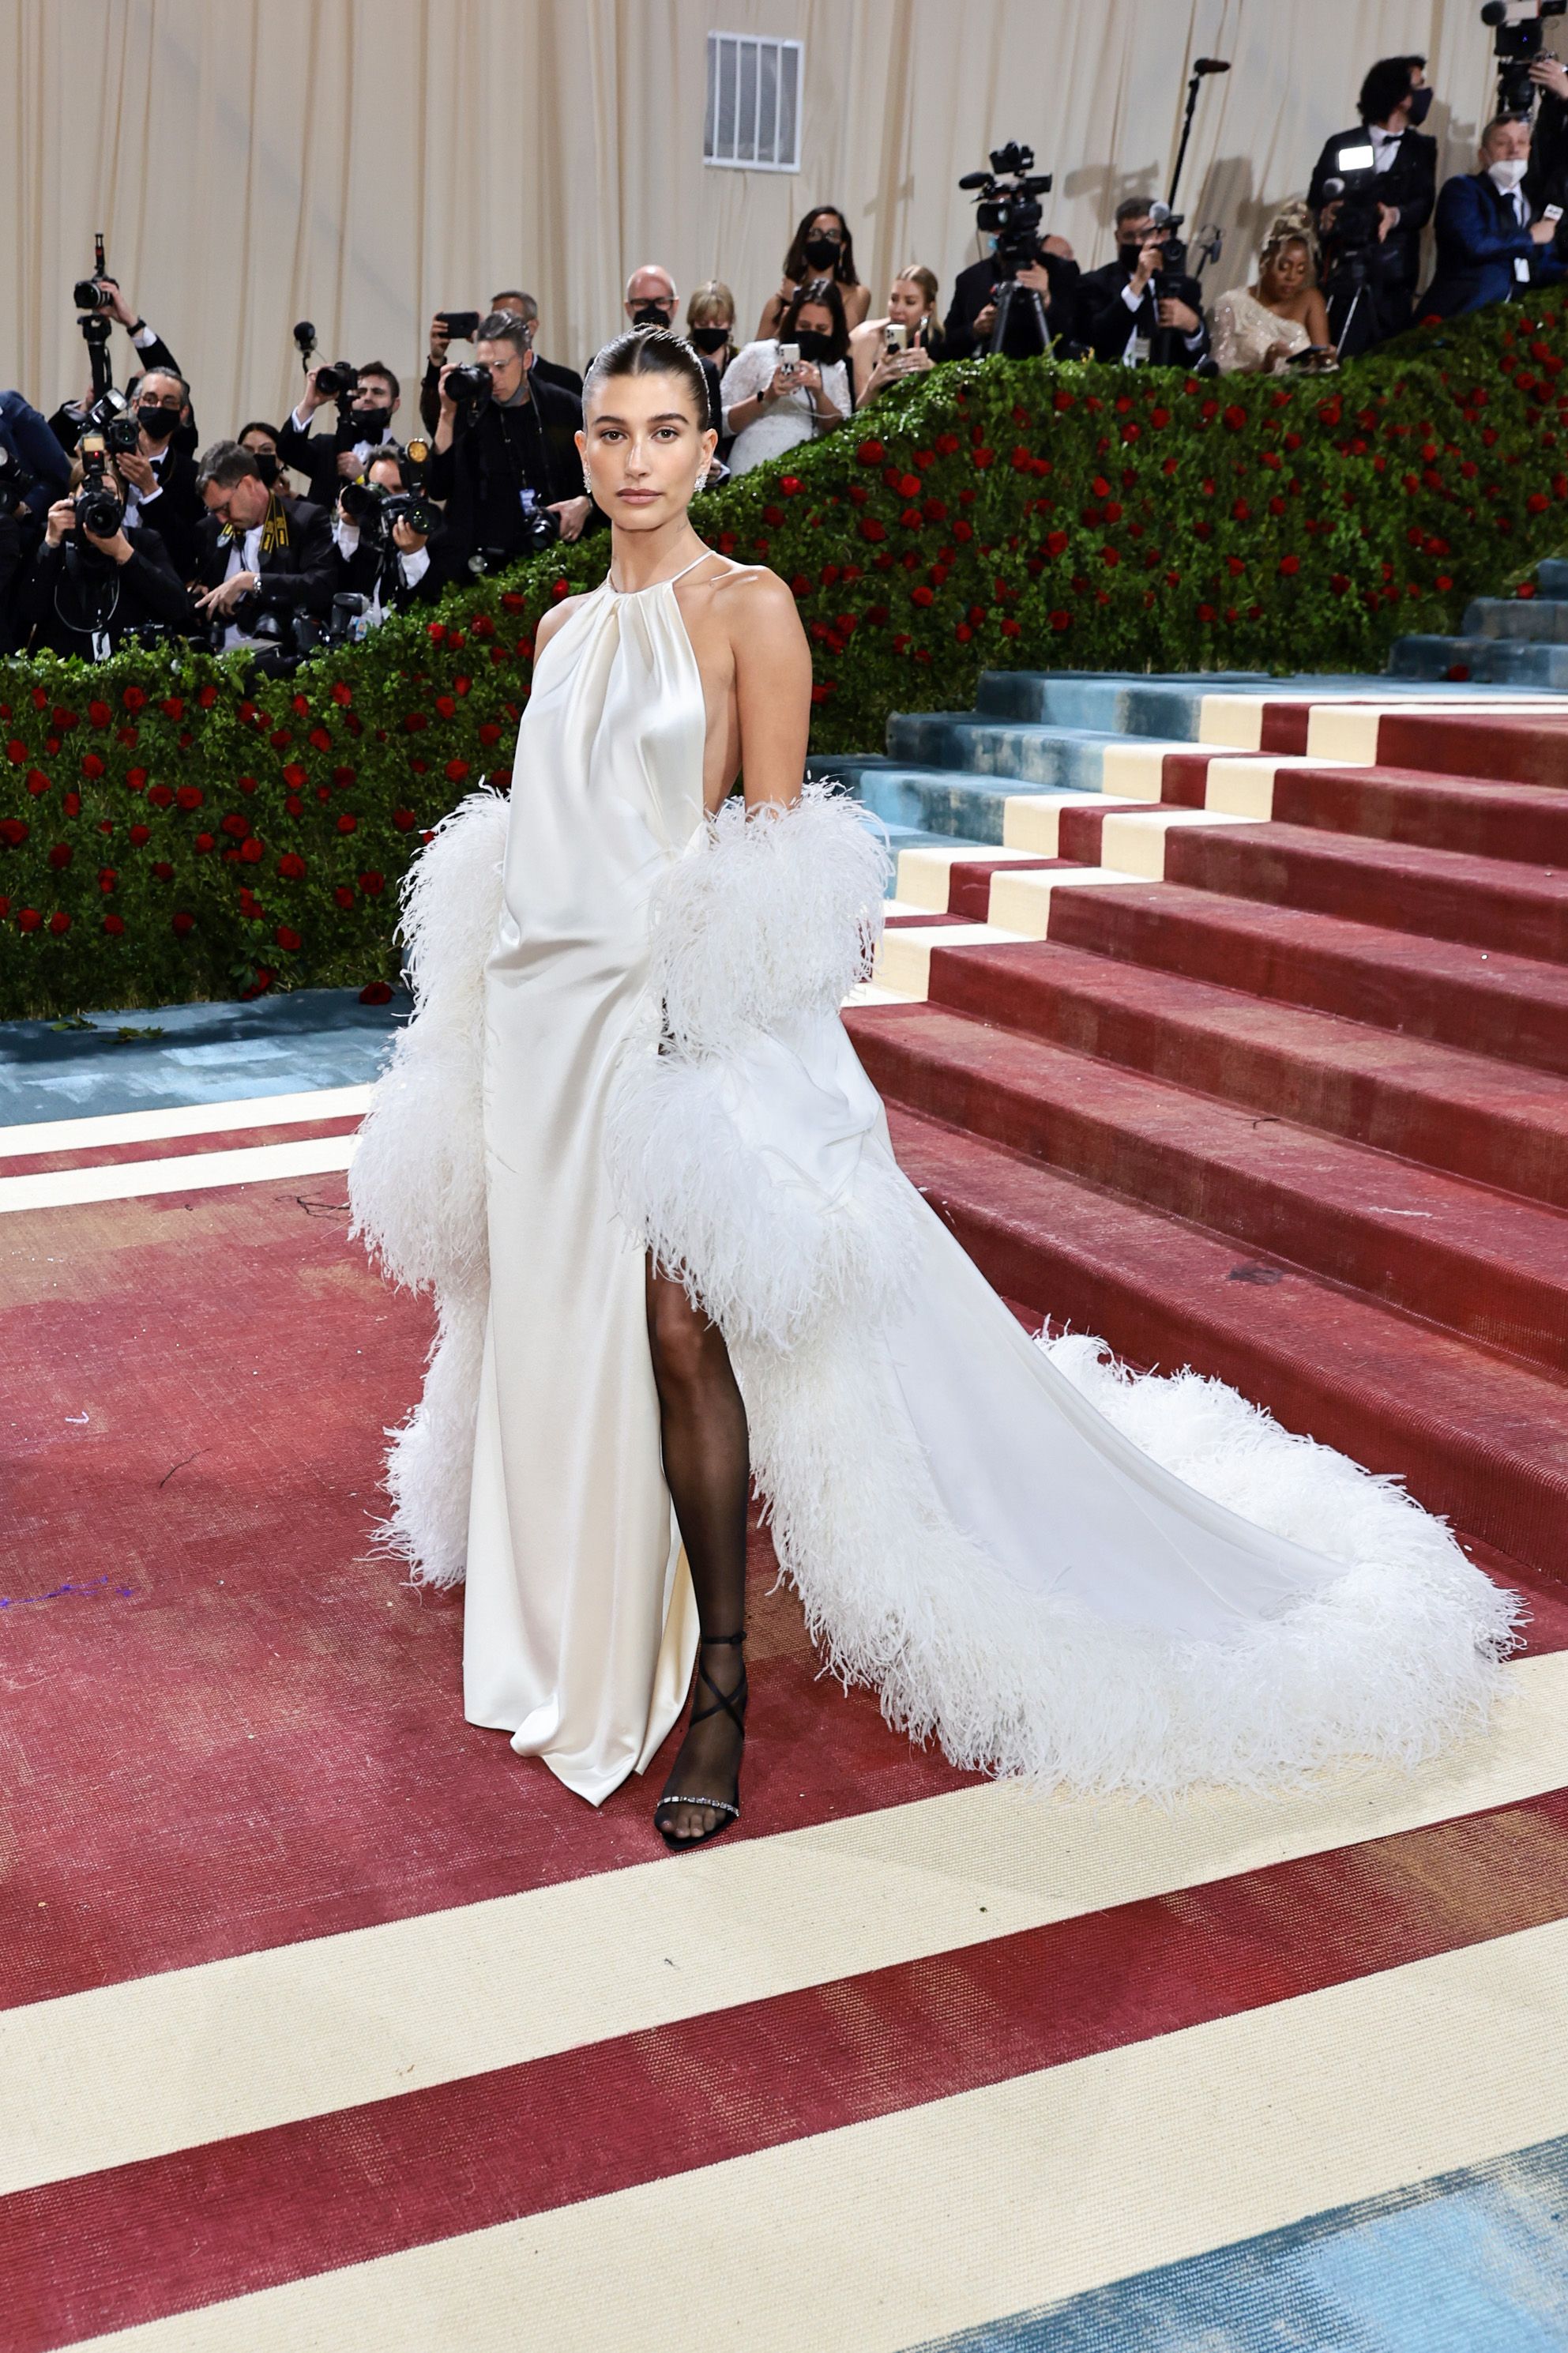 Met Gala 2022 Celeb Red Carpet Outfits: See Photos